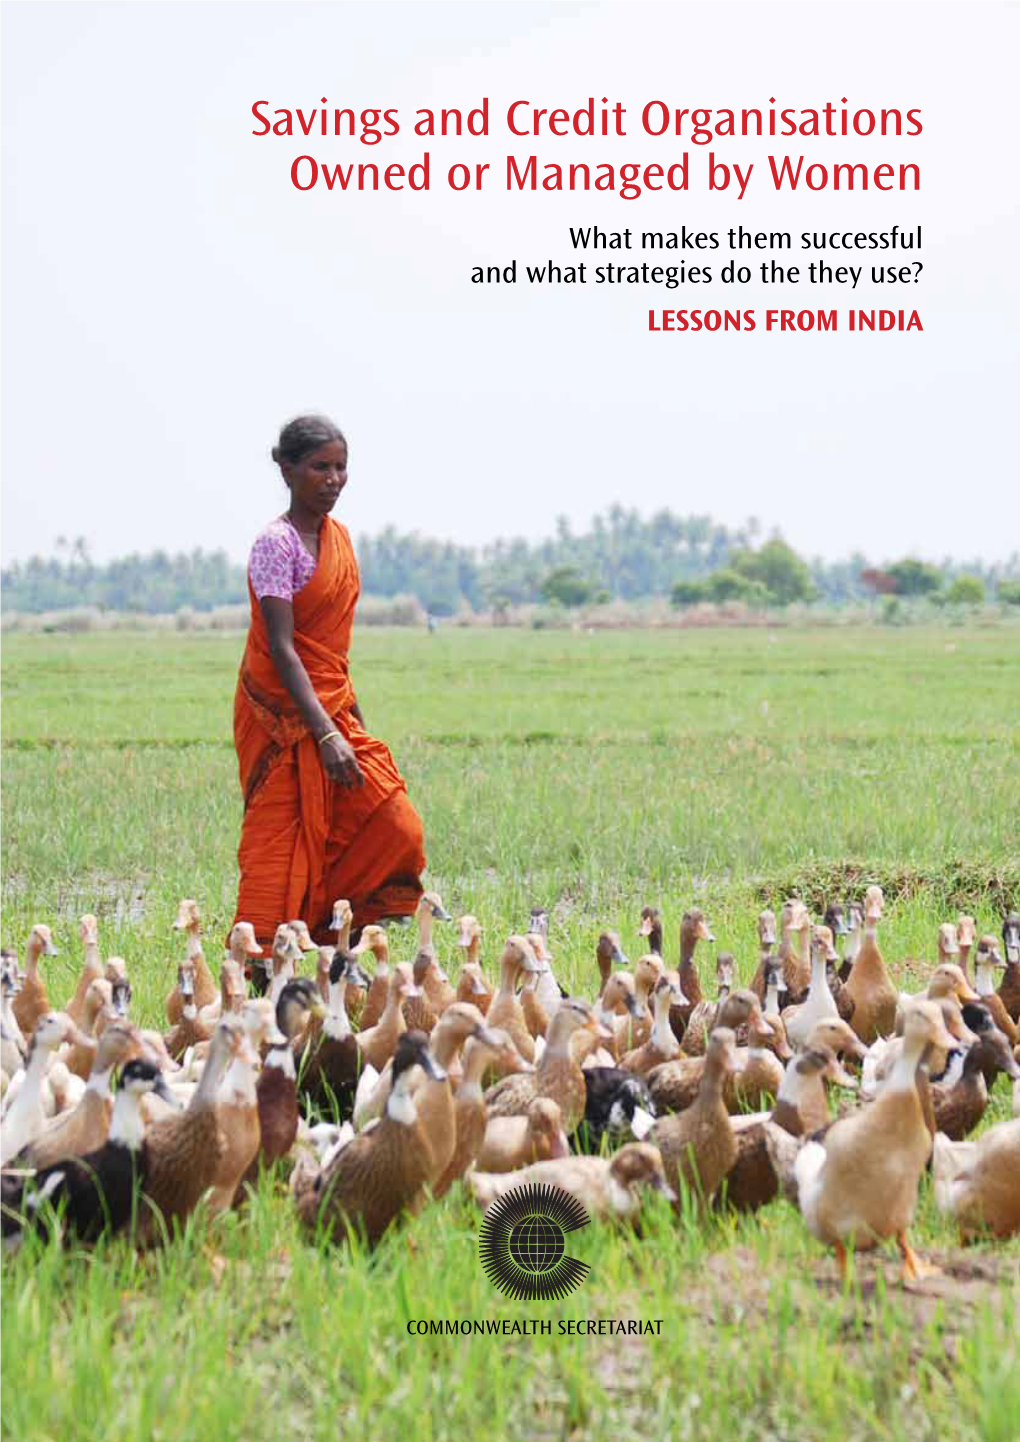 Savings and Credit Organisations Owned Or Managed by Women What Makes Them Successful and What Strategies Do the They Use? Lessons from India